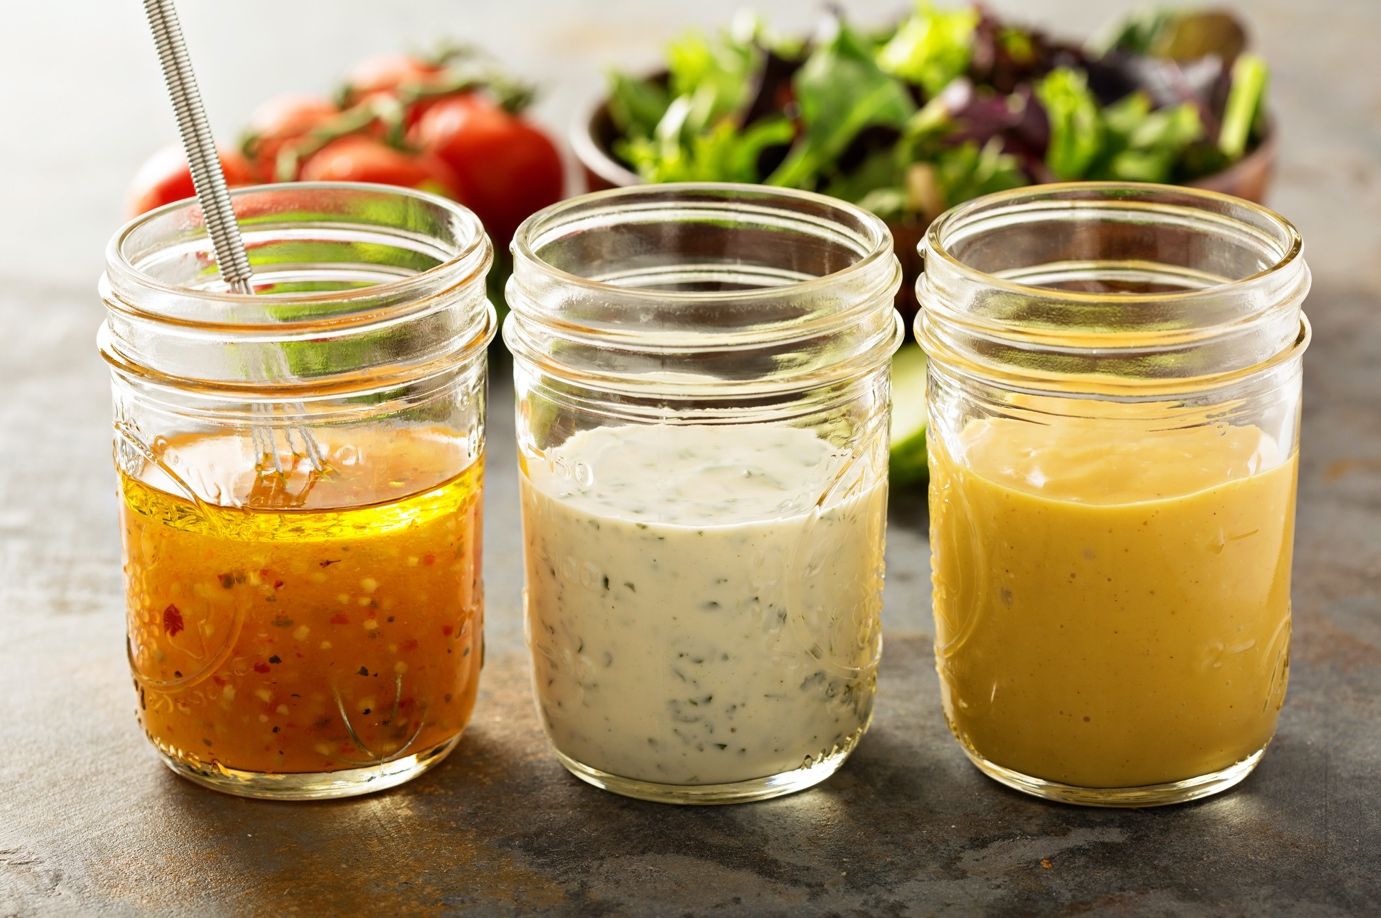 Variety of homemade sauces and salad dressings in mason jars including vinaigrette, ranch and honey mustard.